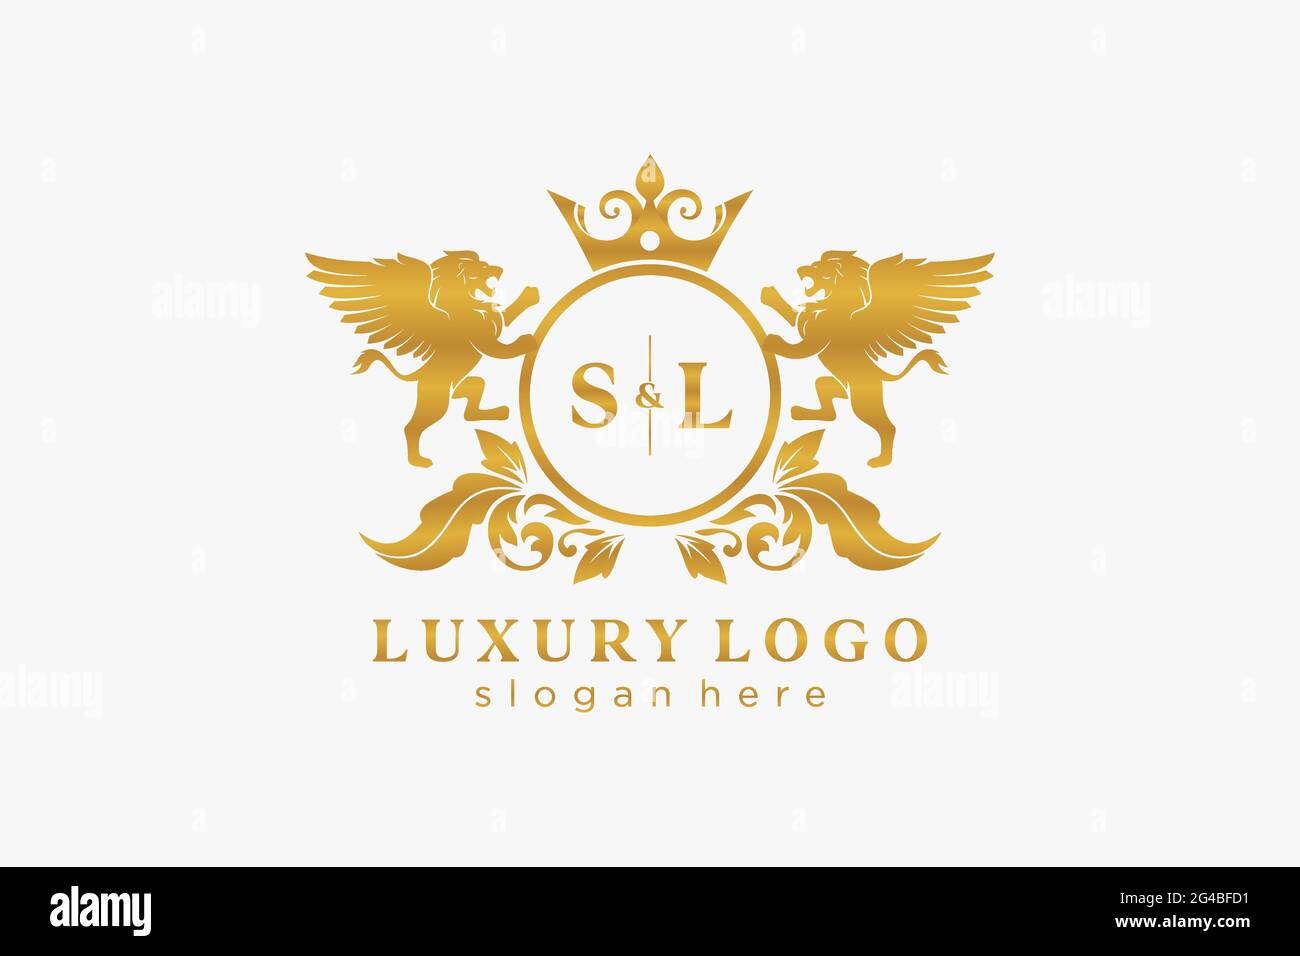 SL Letter Lion Royal Luxury Logo template in vector art for Restaurant, Royalty, Boutique, Cafe, Hotel, Heraldic, Jewelry, Fashion and other vector il Stock Vector